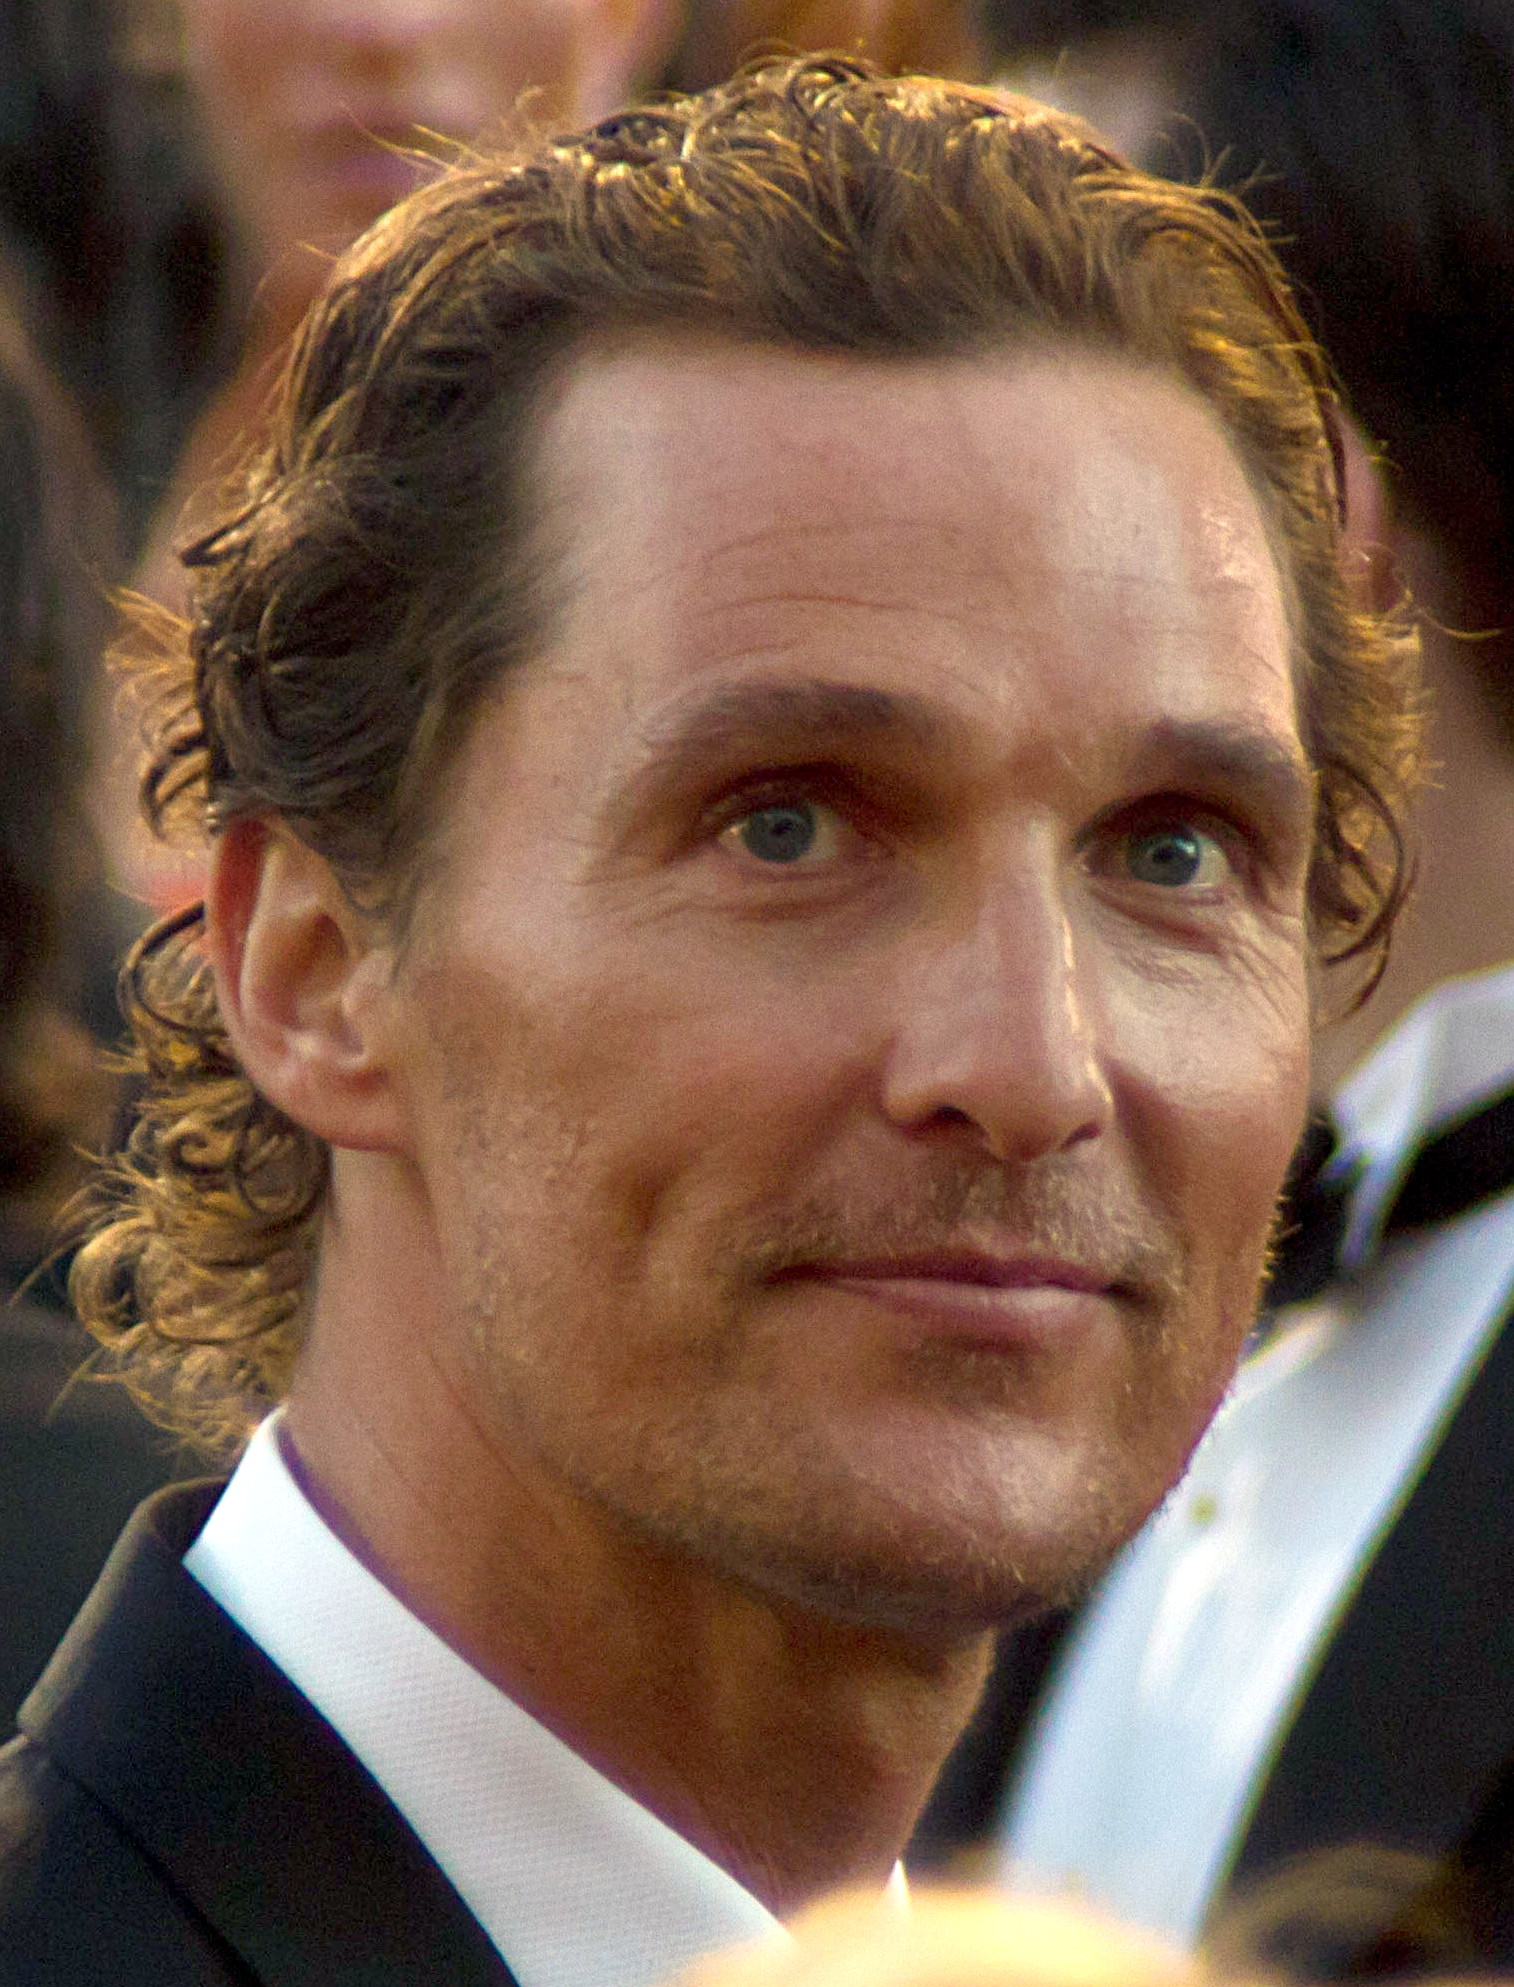 The Top 5 Matthew McConaughey Movies You Don’t Wan’t To Miss! Indigo